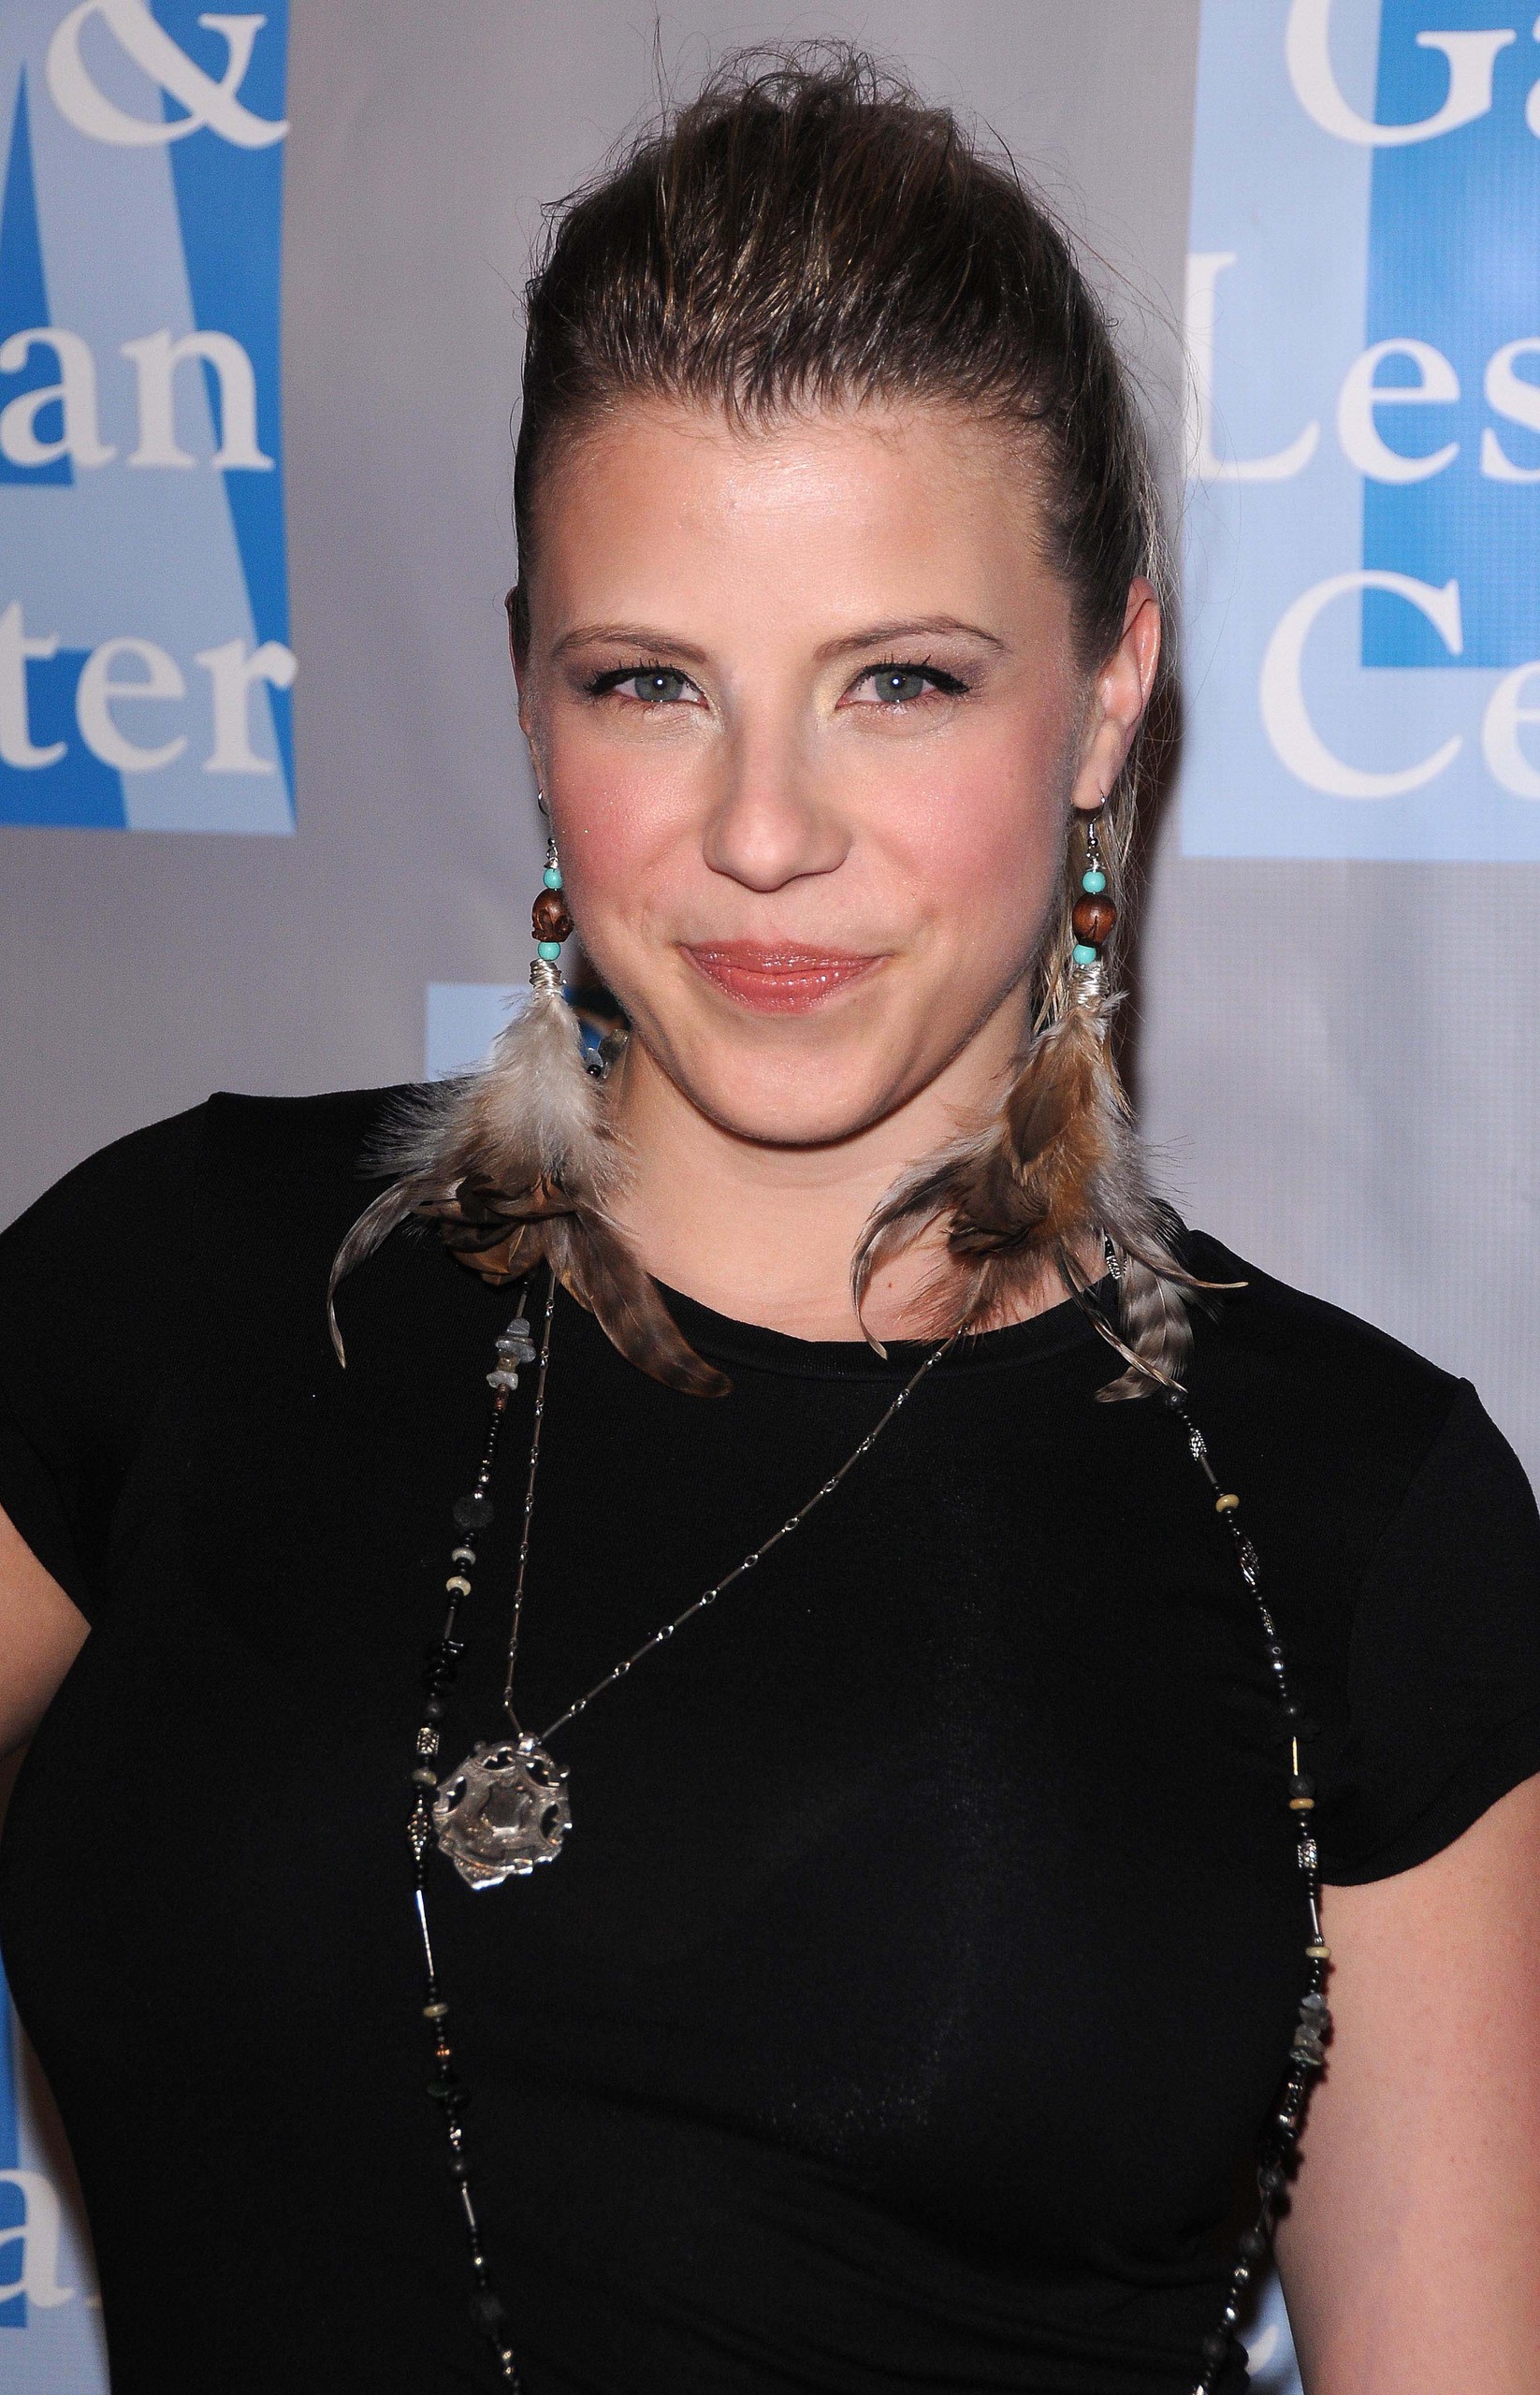 jodie sweetin, images, image, wallpaper, photos, photo, photograph, gallery...